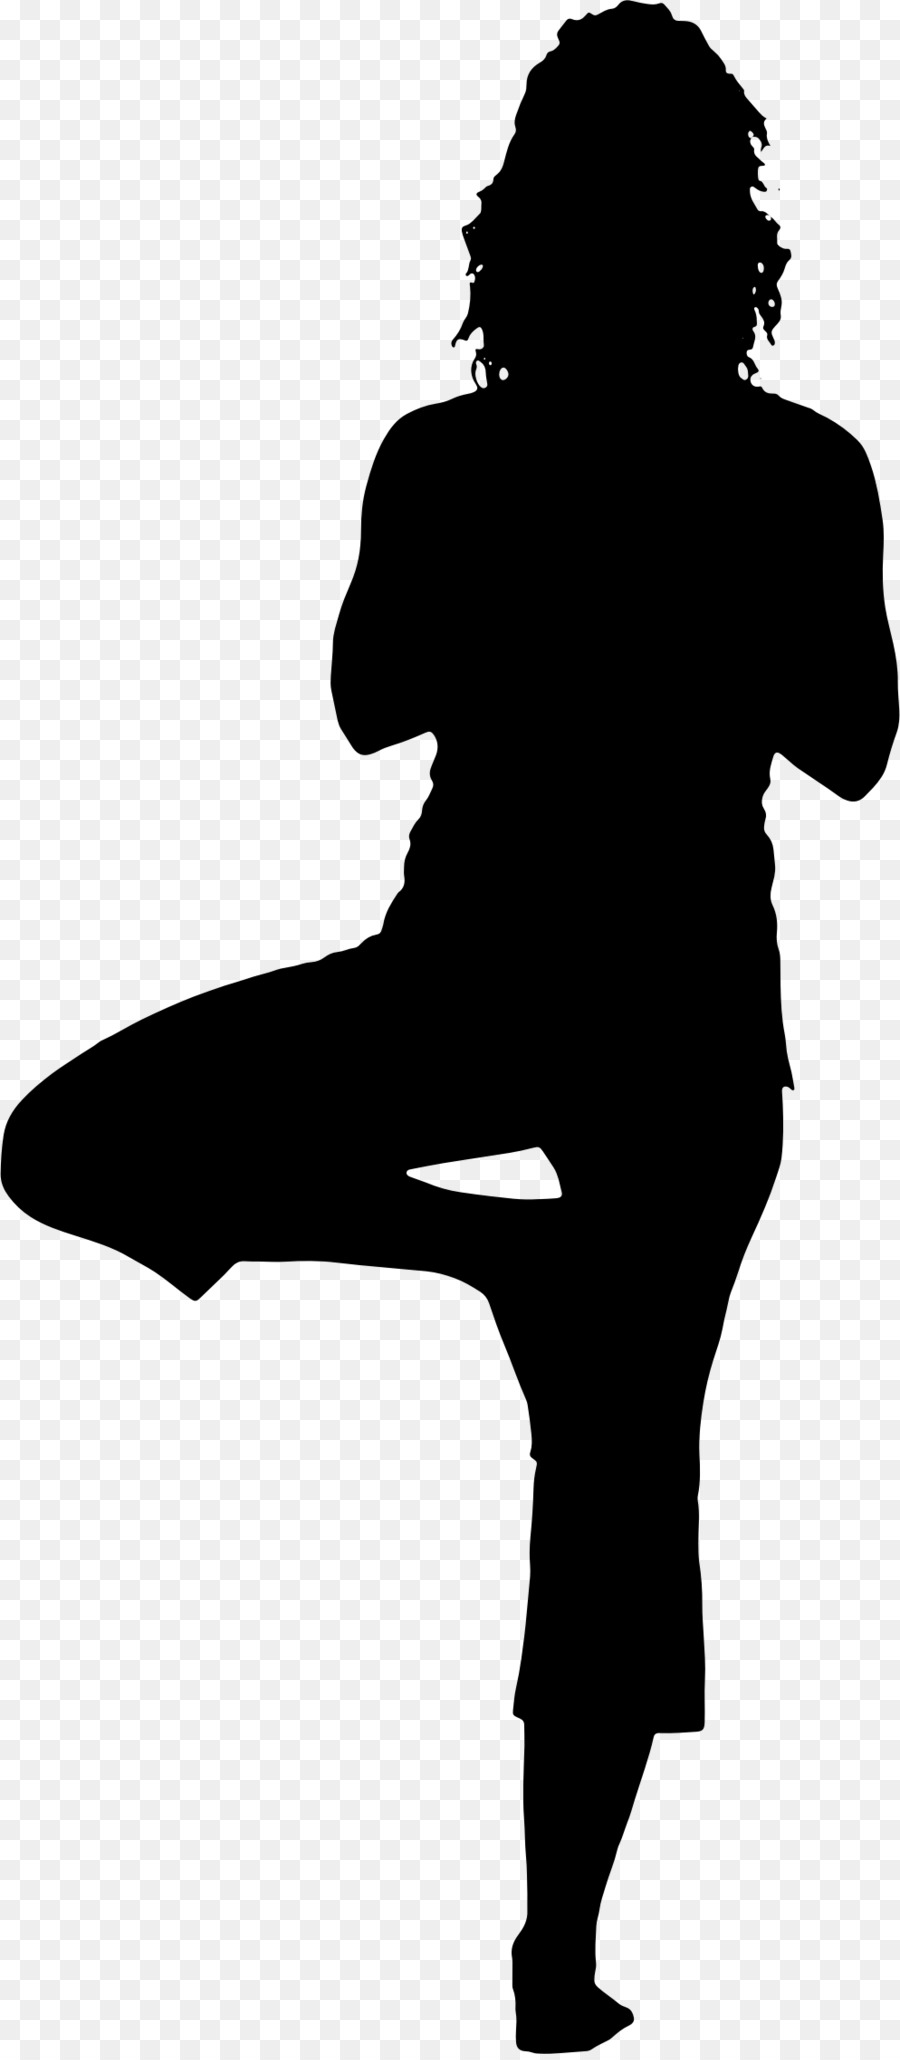 Yoga Silhouette Lotus position Woman - Yoga png download - 994*2268 - Free Transparent  png Download.